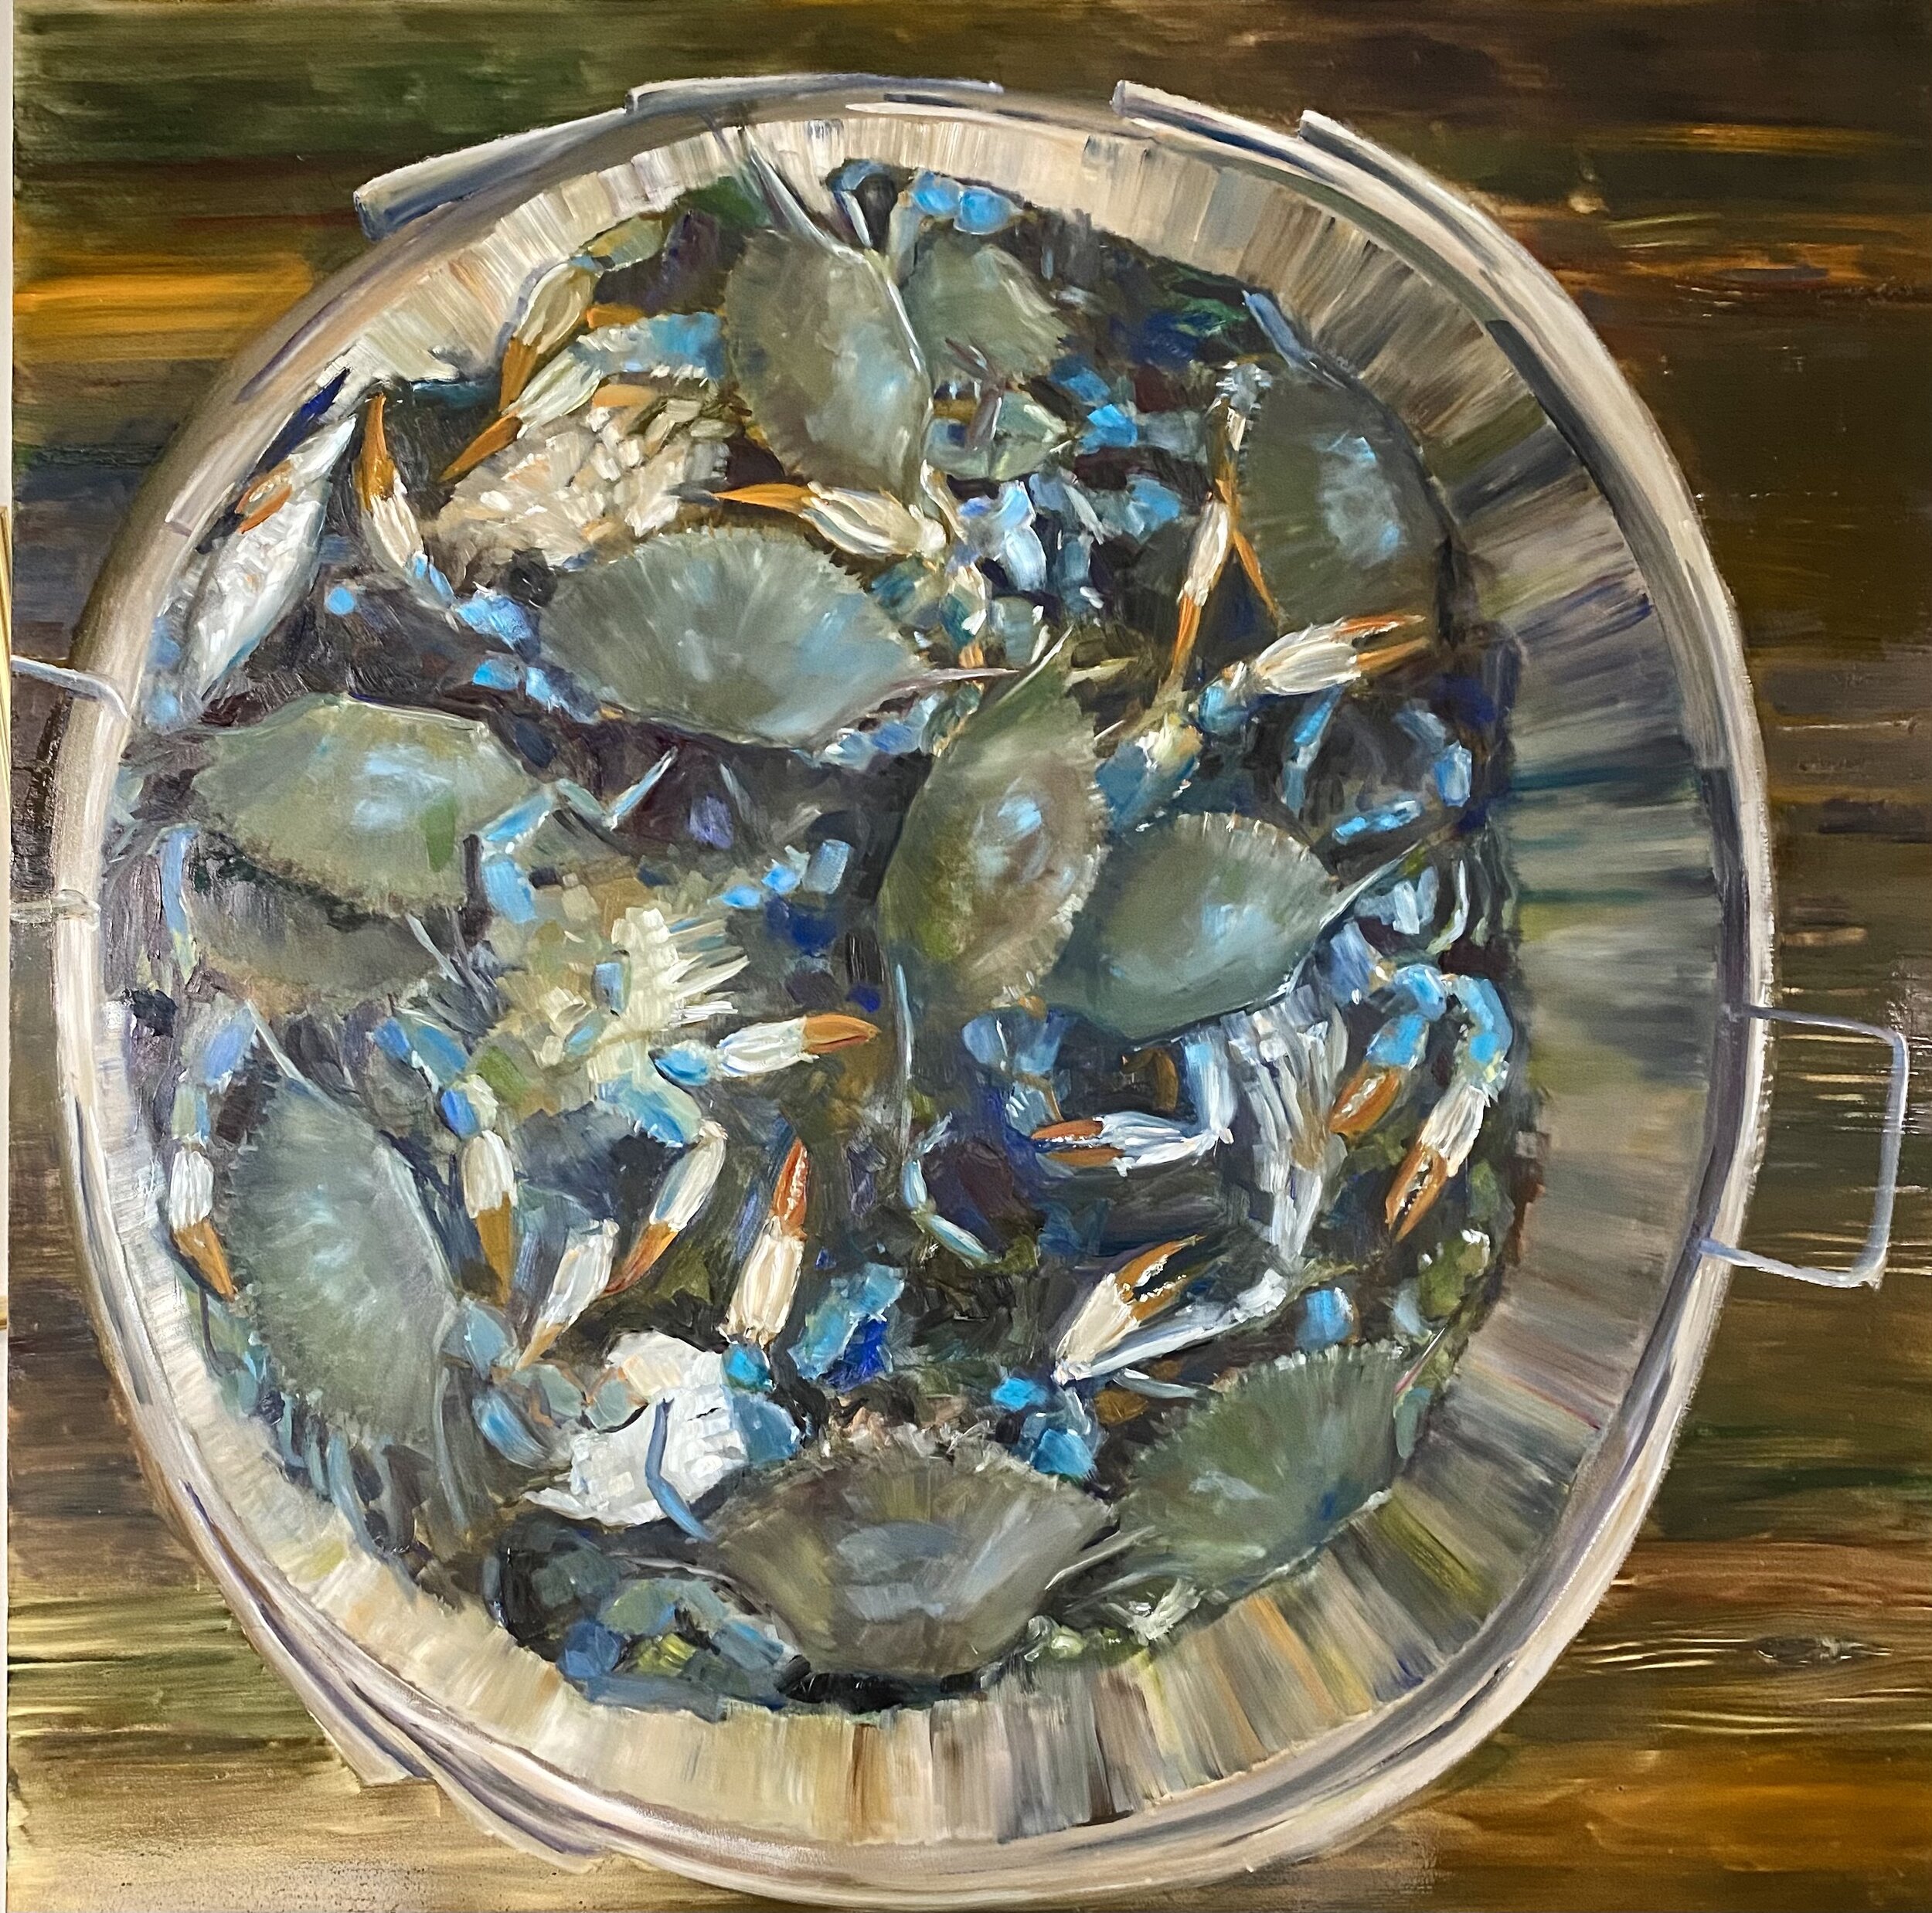 Bushel of Blue Crabs, Oil painting on wooden panel, 32" square